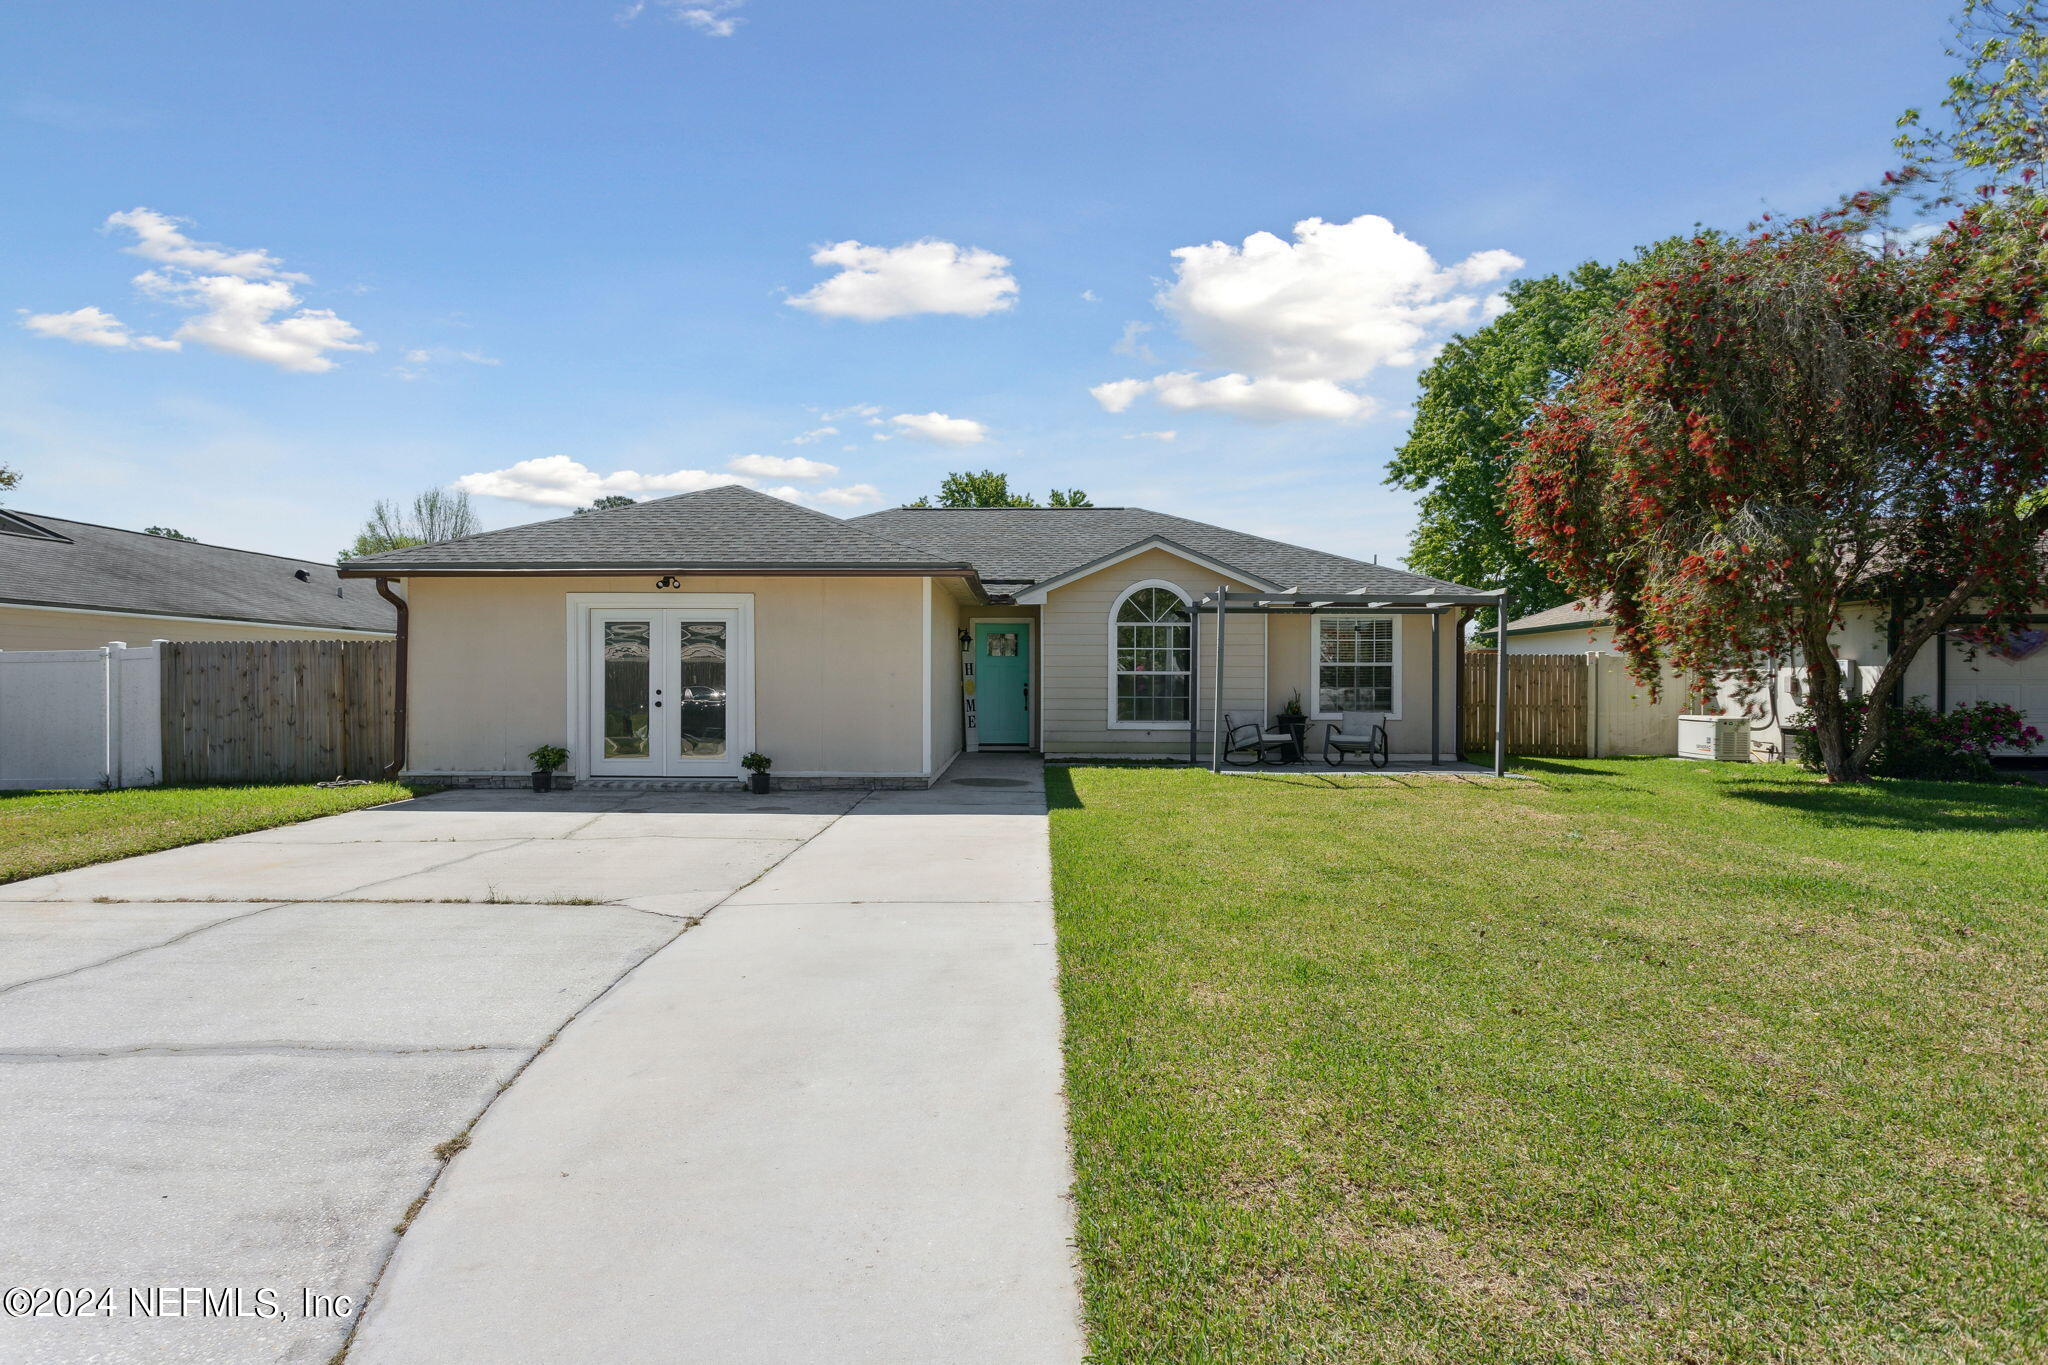 Middleburg, FL home for sale located at 2807 Diploma Court, Middleburg, FL 32068